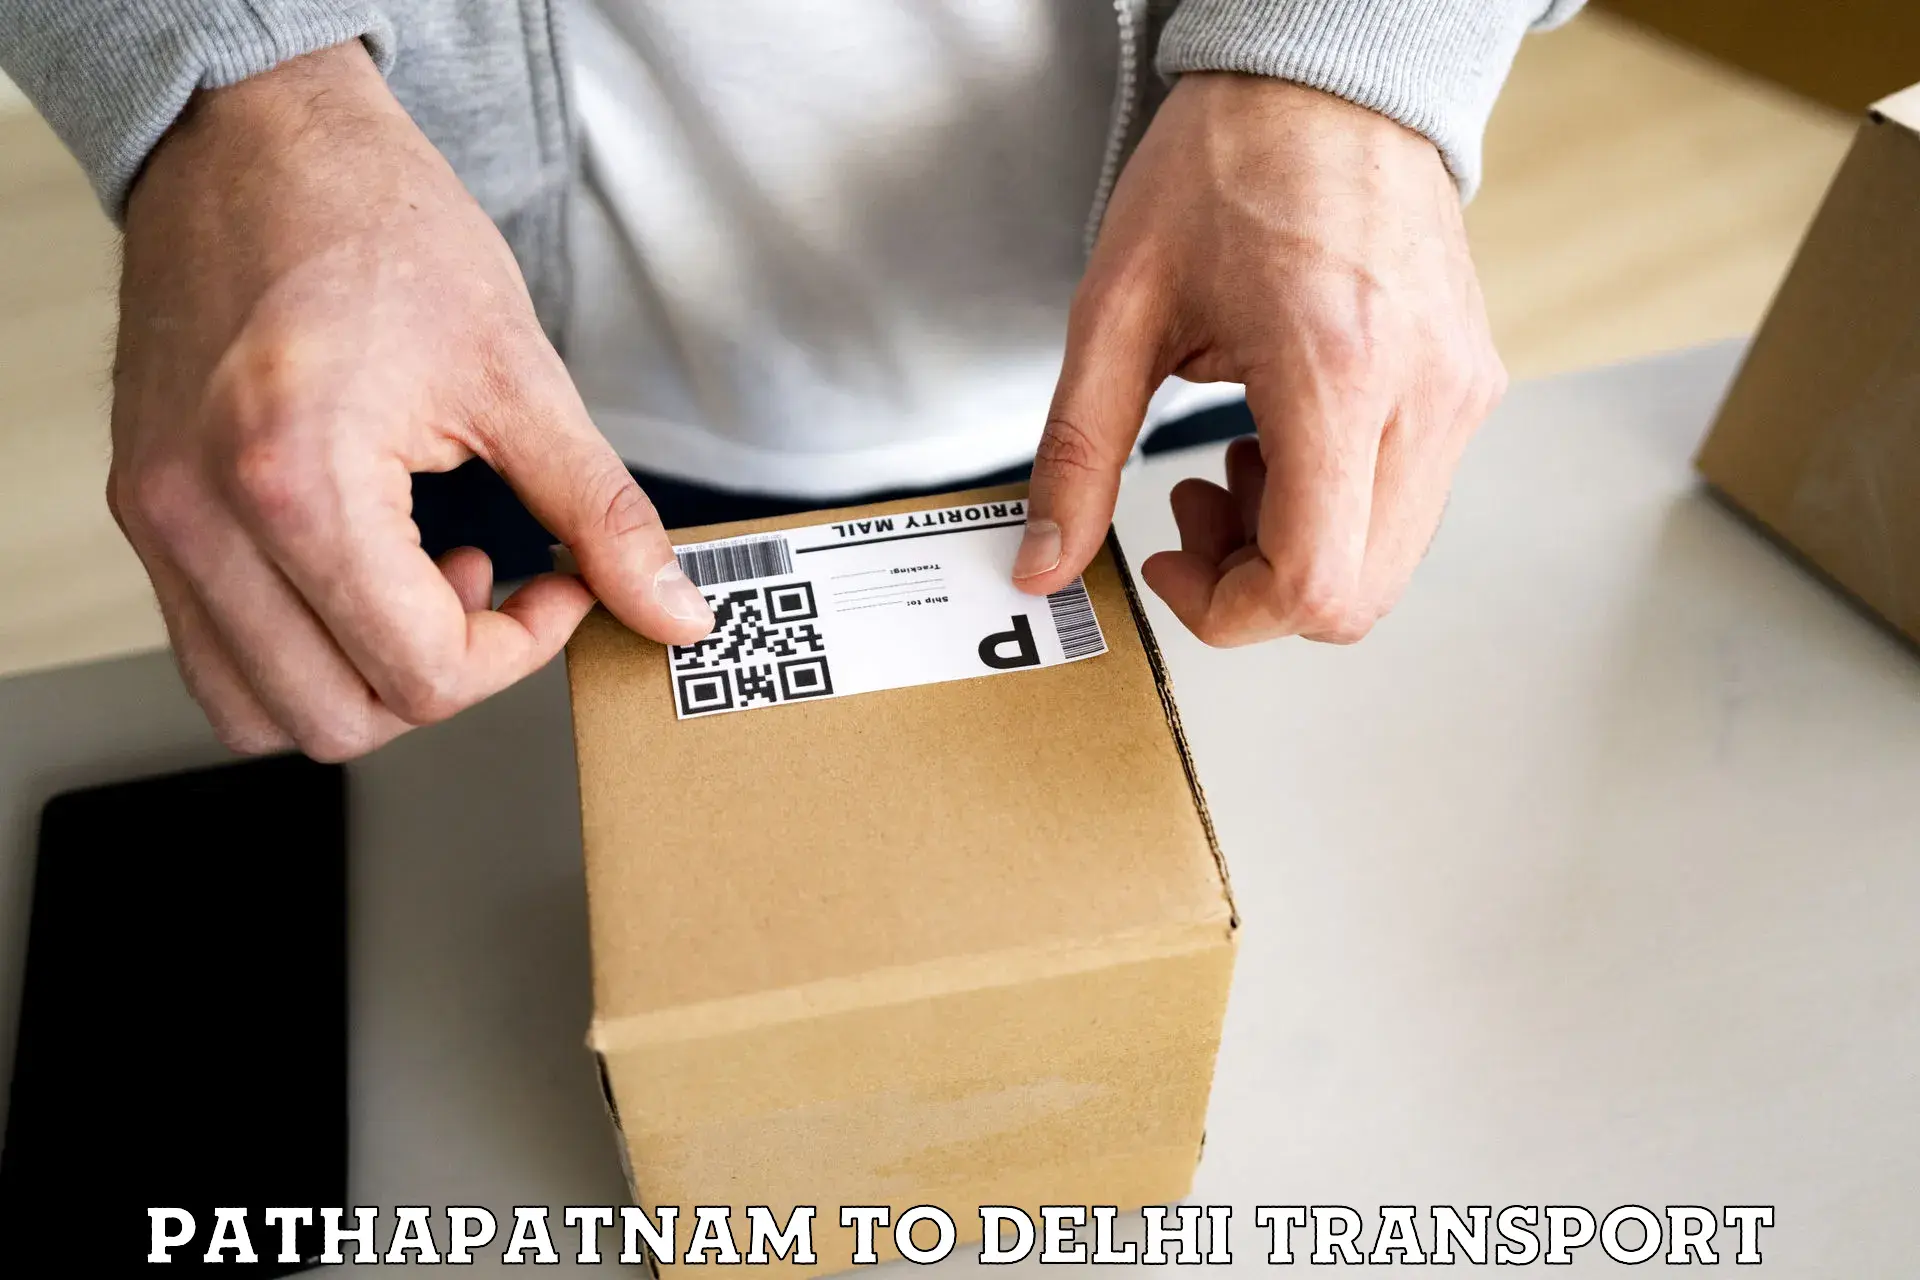 Delivery service Pathapatnam to NCR